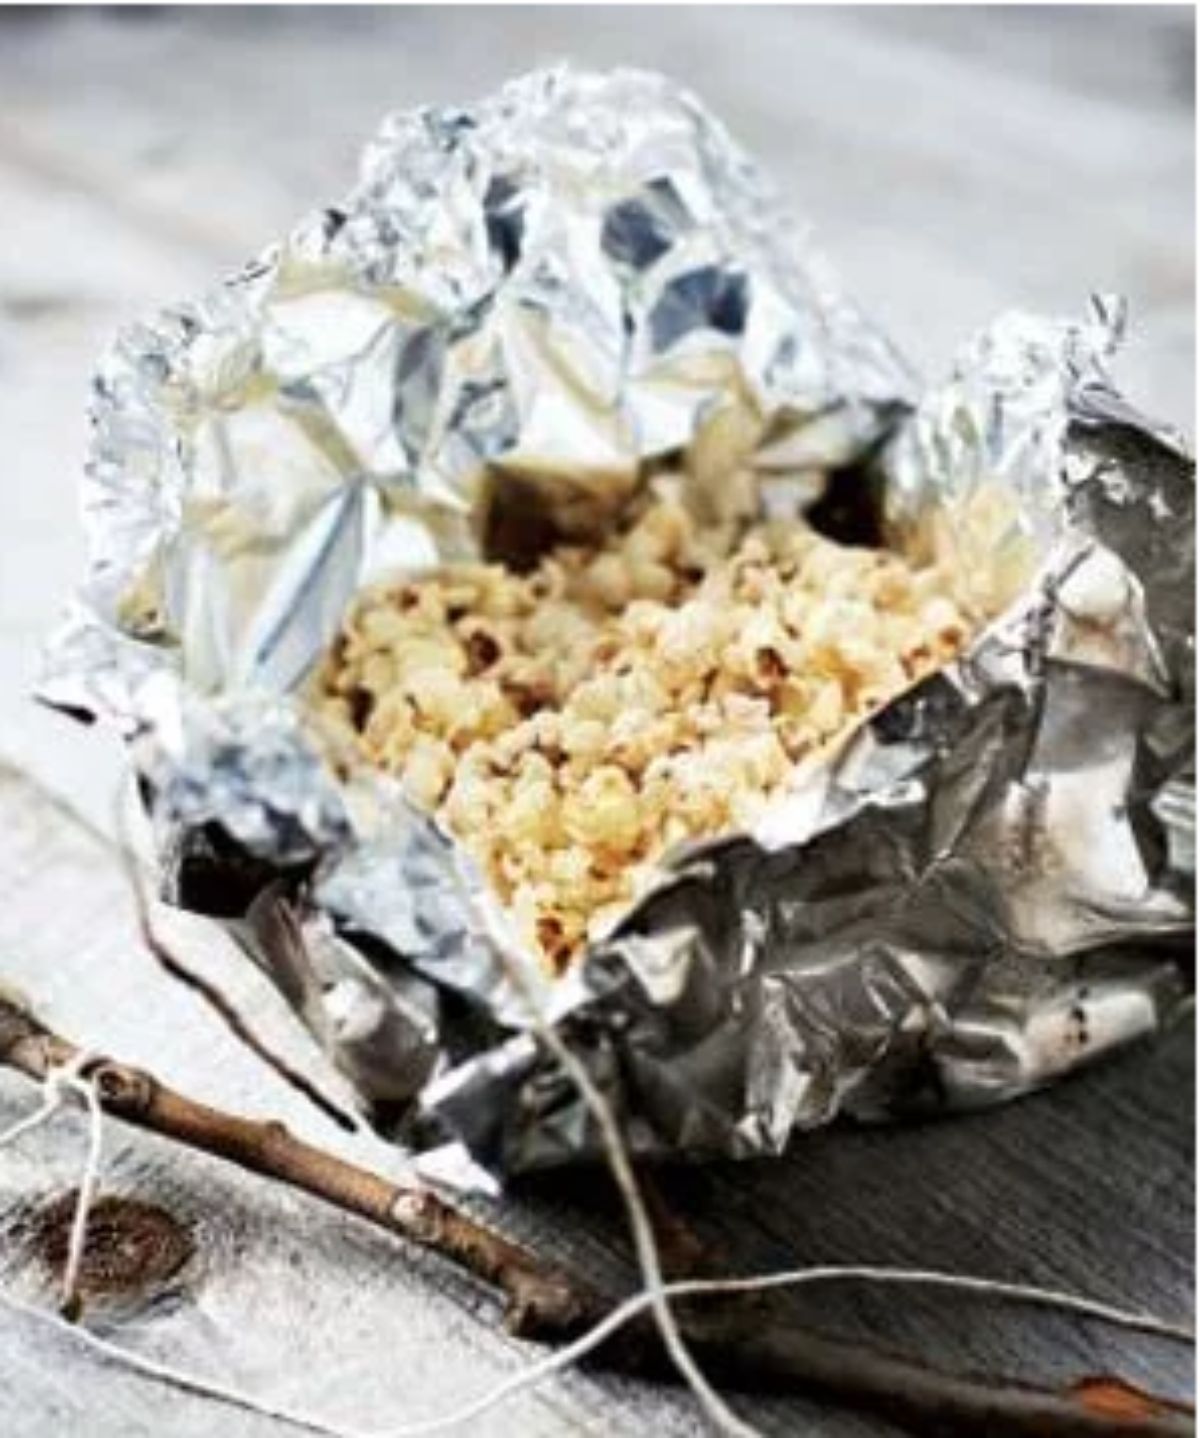 on a table is a parcel of tin foil containing popcorn